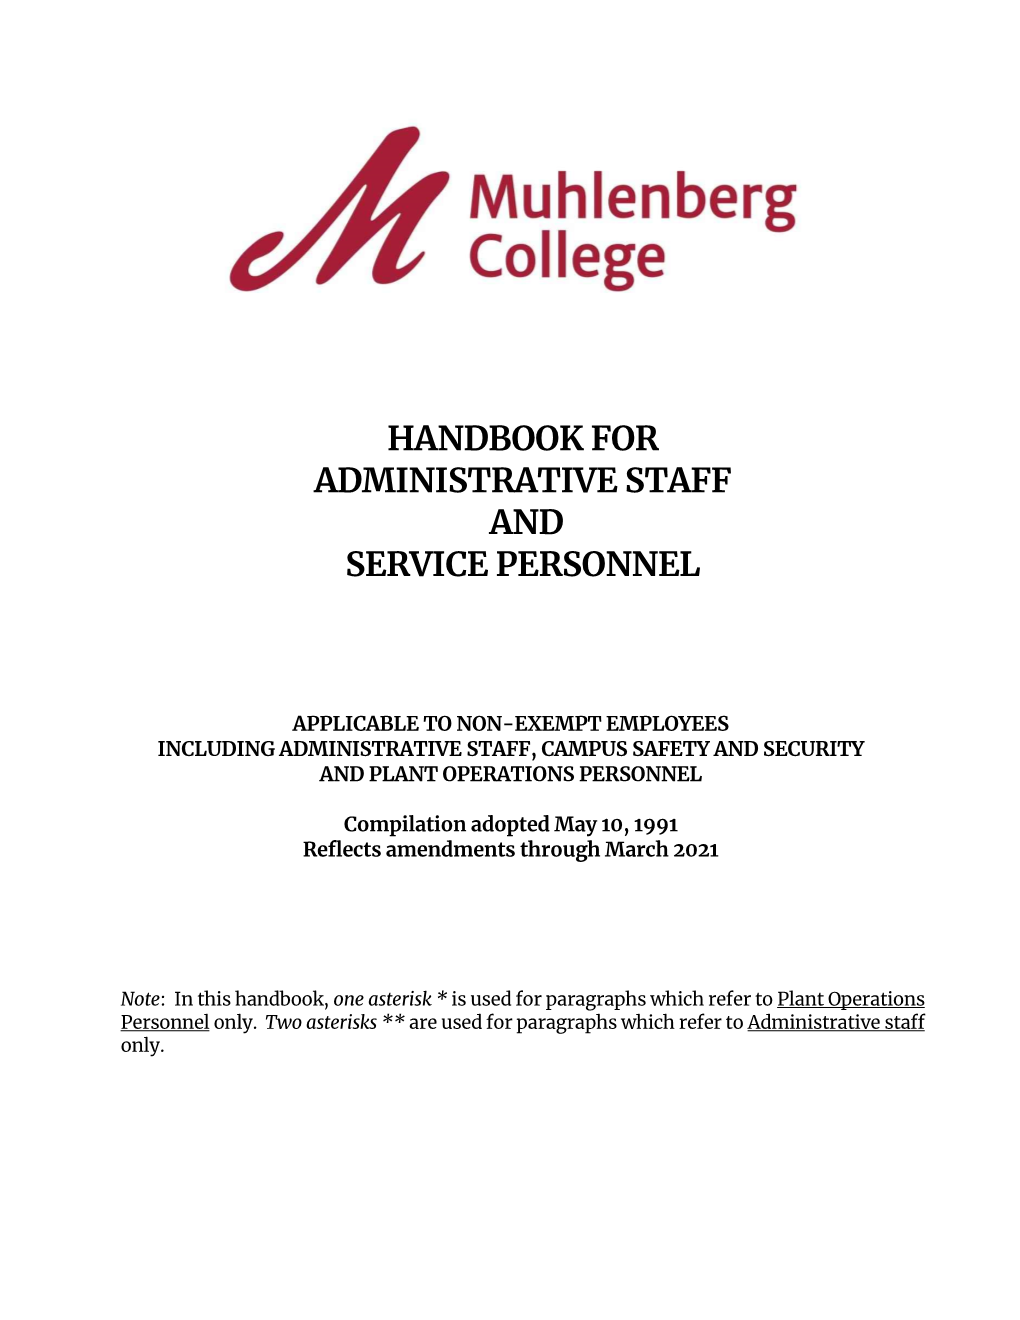 Handbook for Administrative Staff and Service Personnel